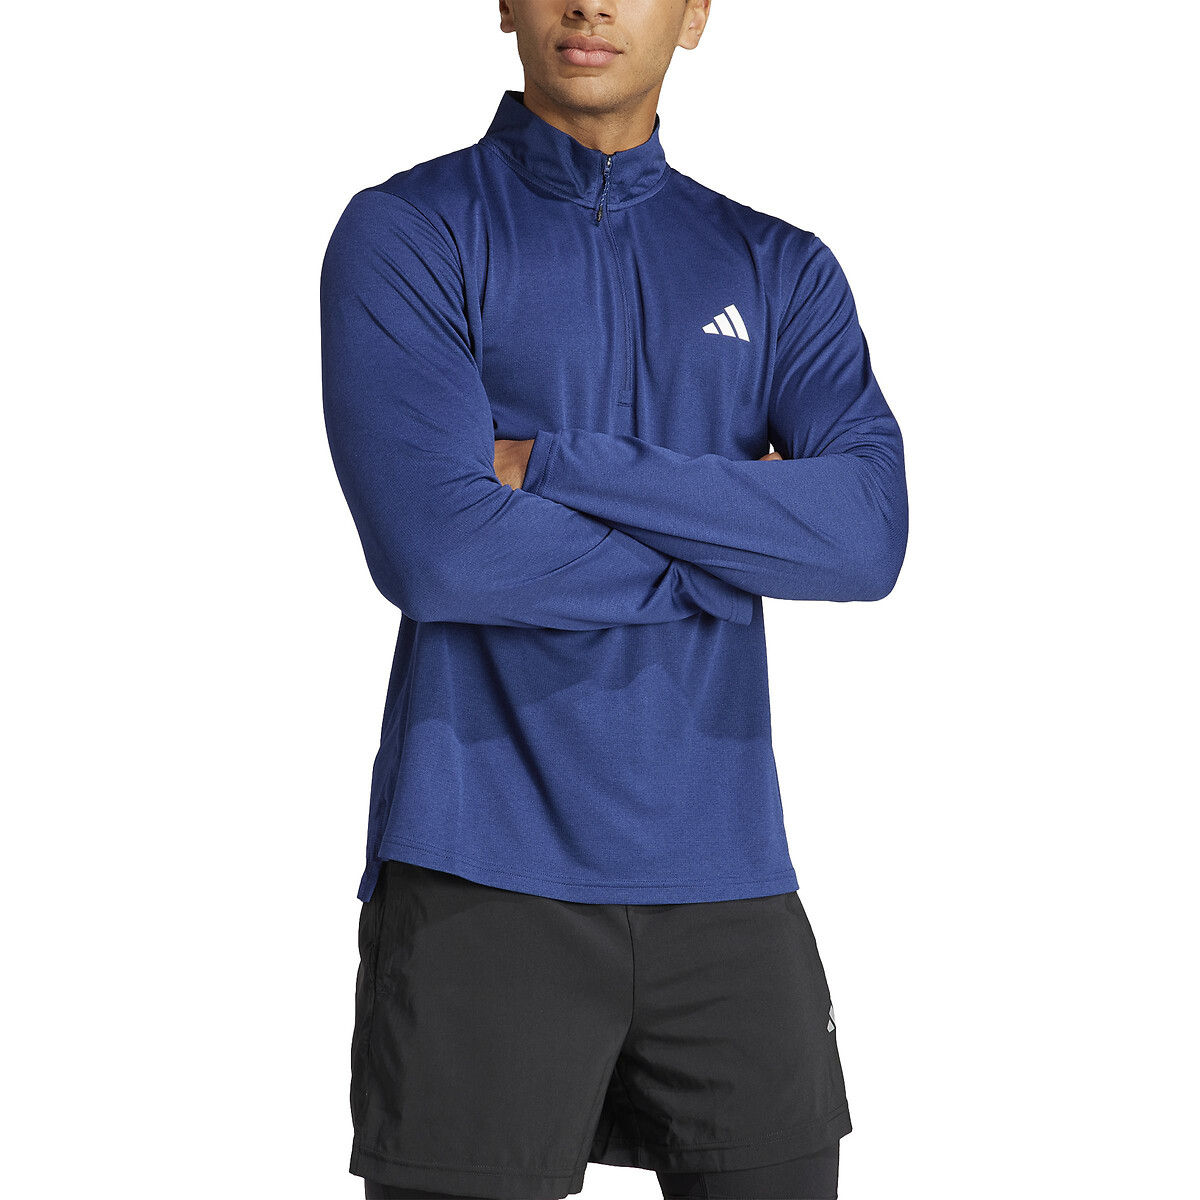 Train Essentials Recycled Training Sweatshirt with High Neck